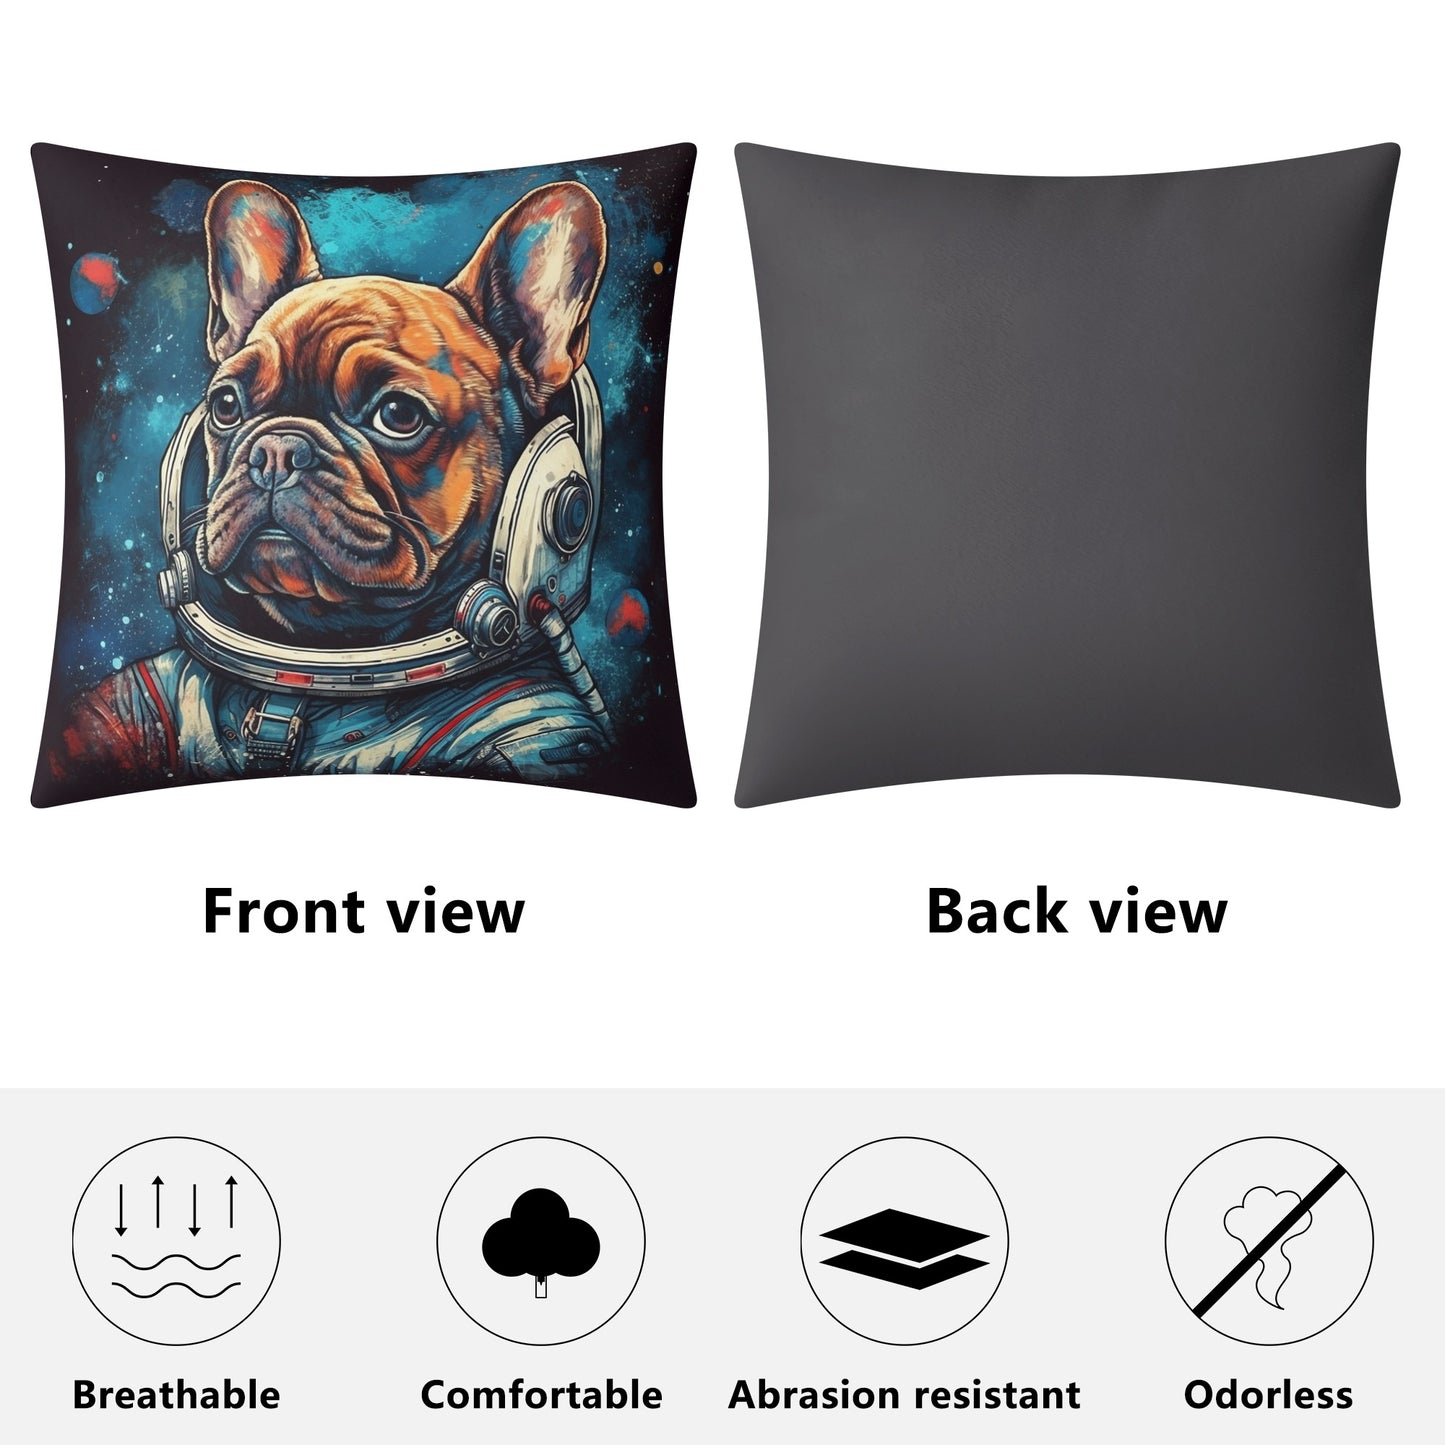 The astronaut - Pillow Cover